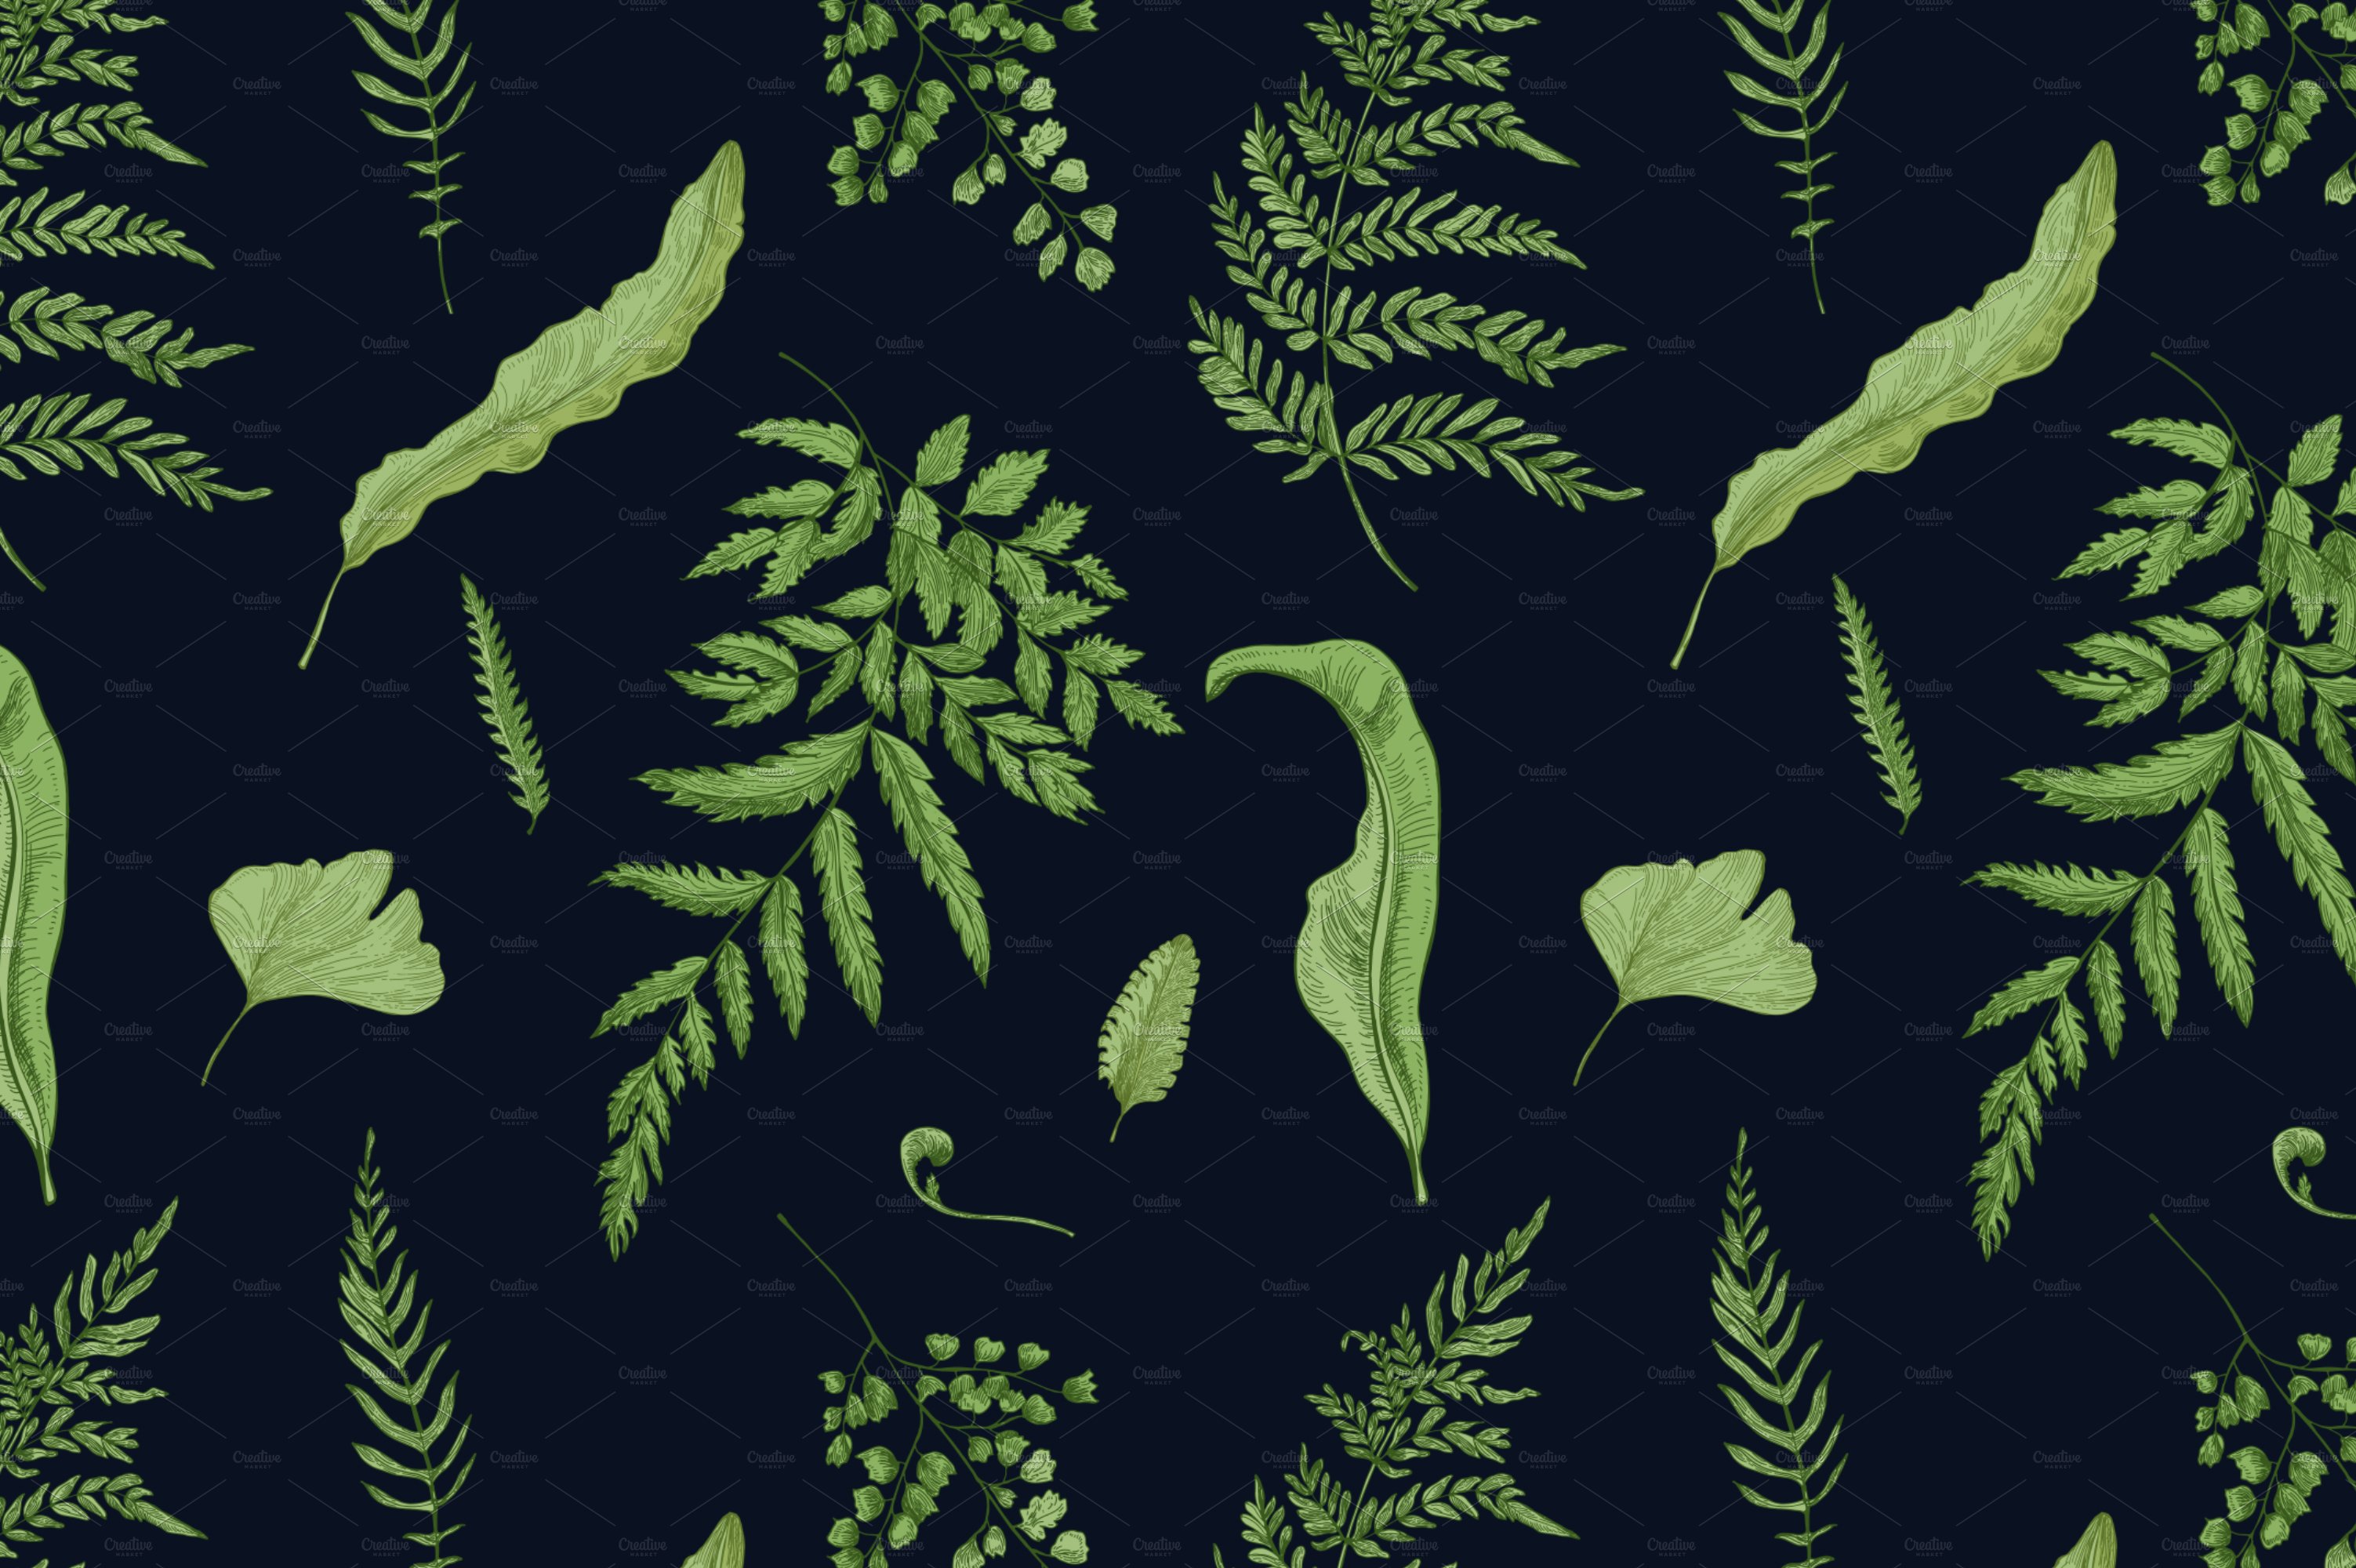 Pattern of green leaves on a black background.